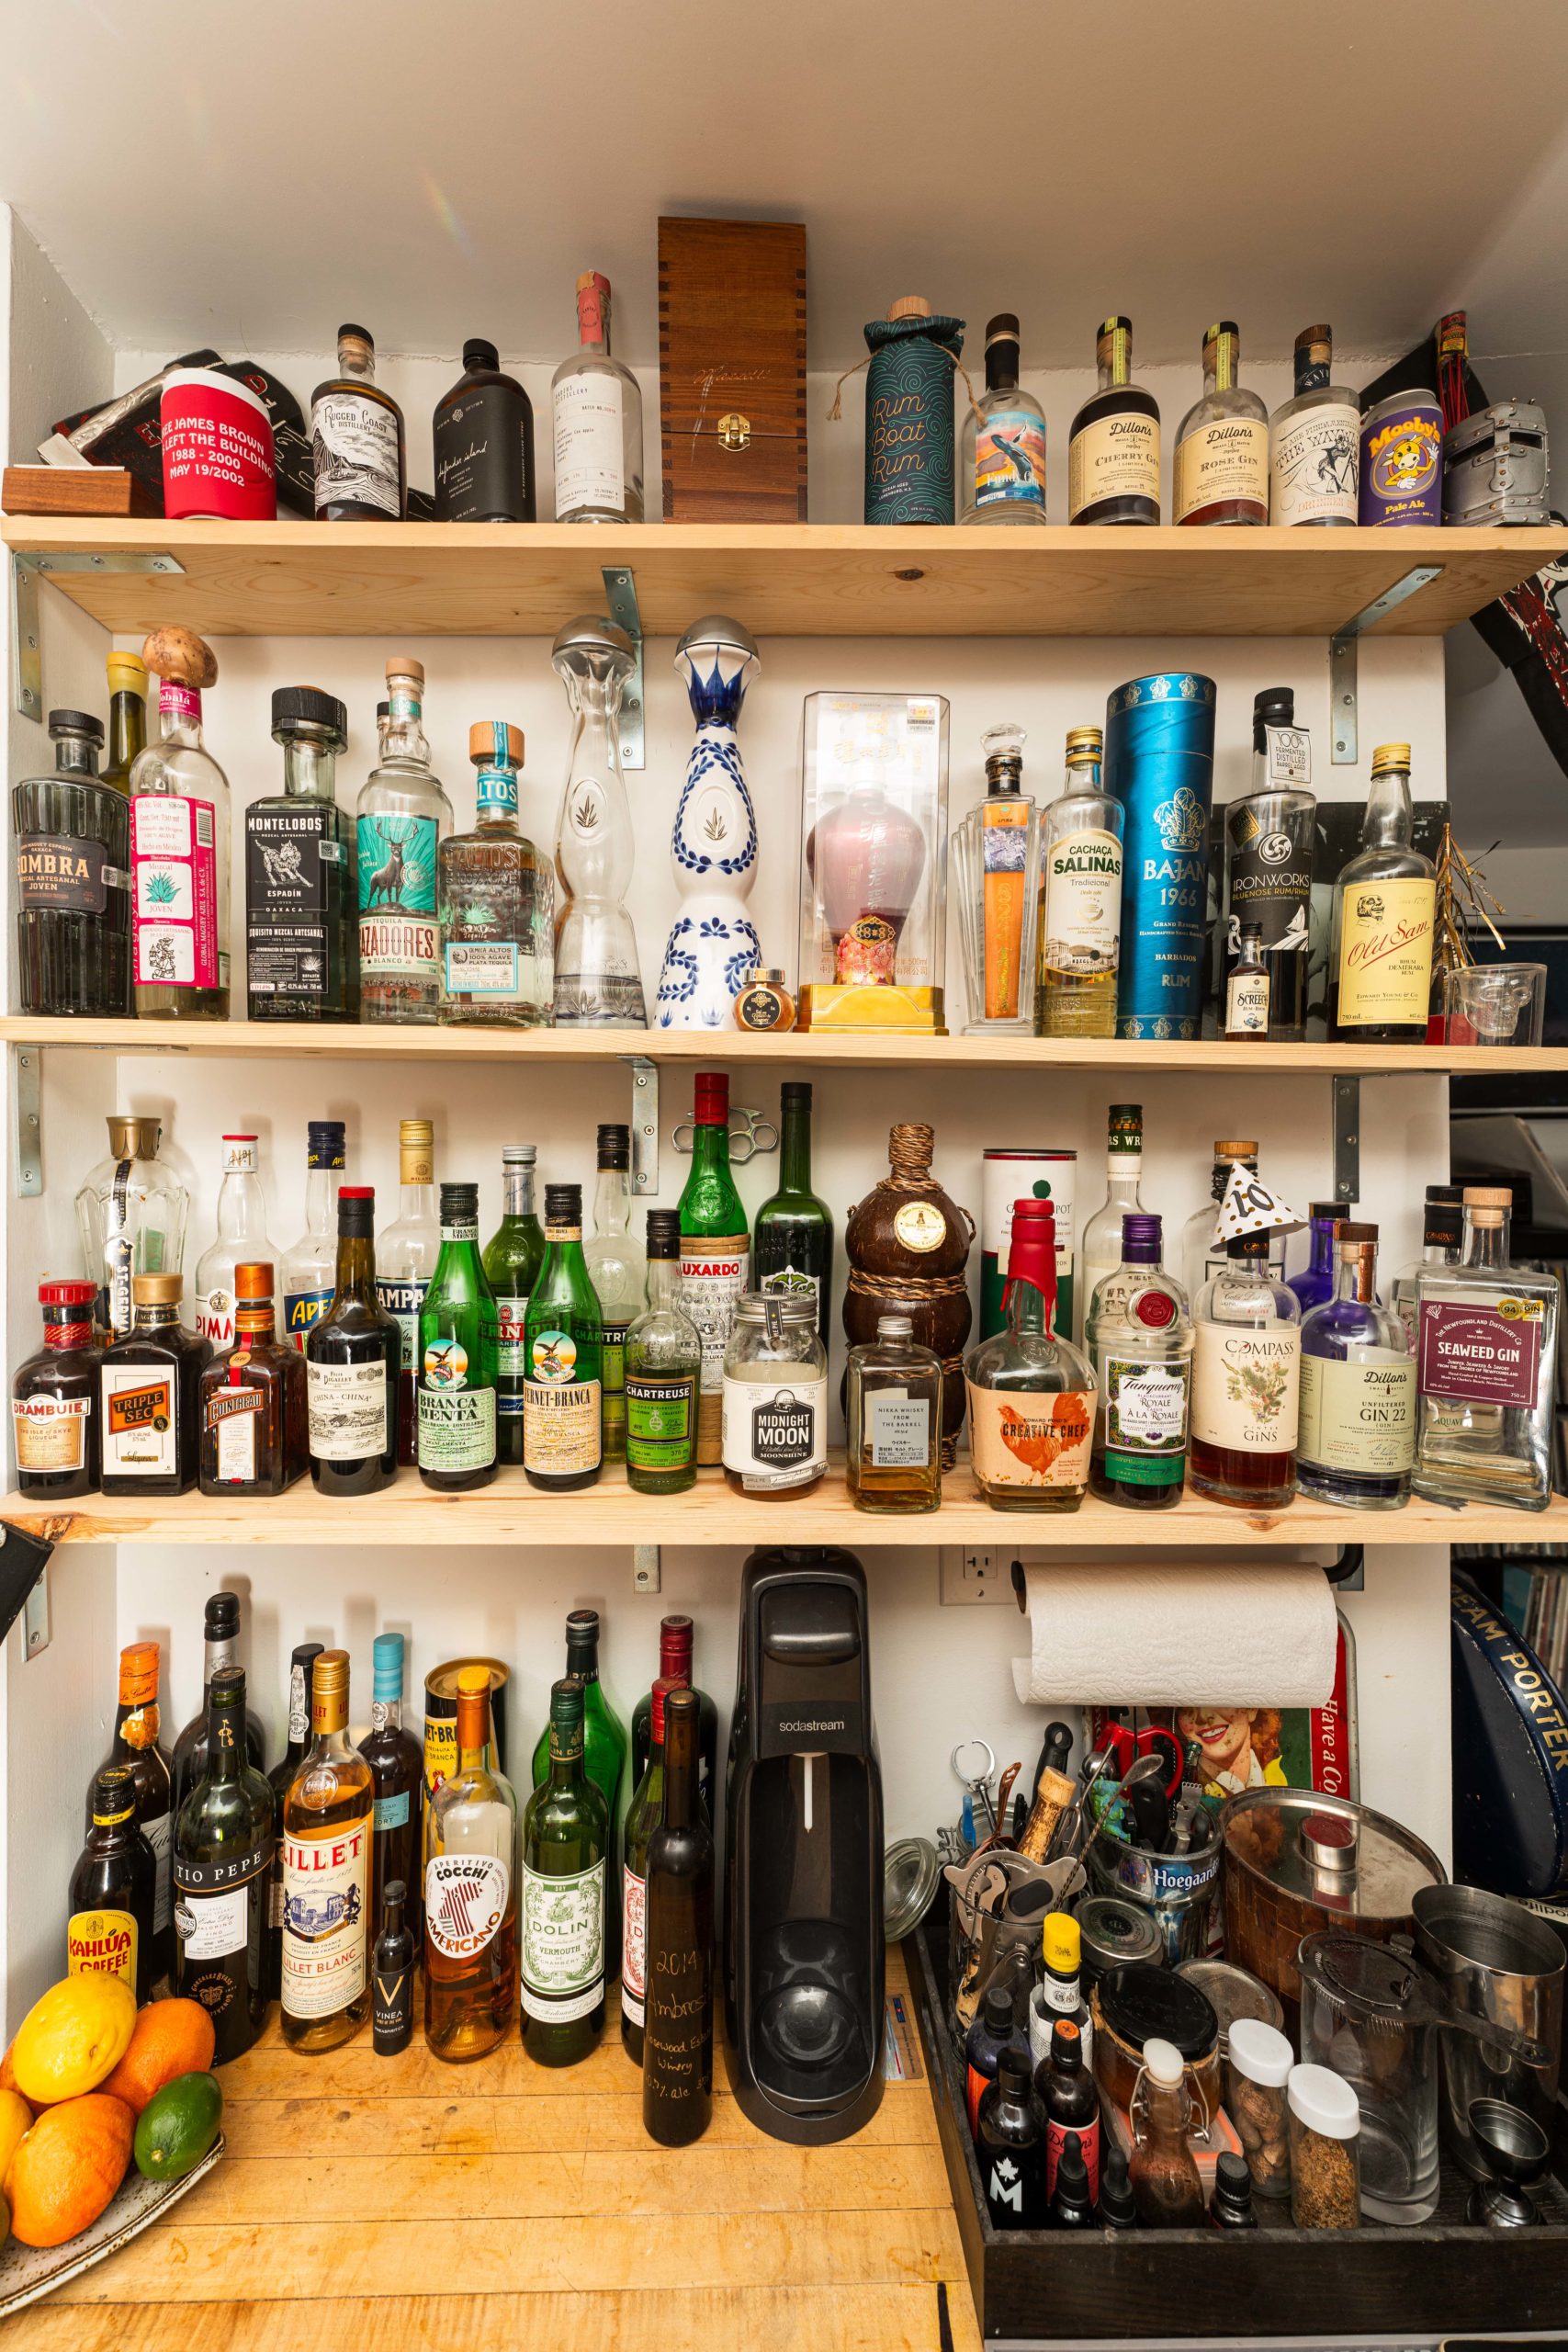 A closer look at McMeekin's sizable liquor collection